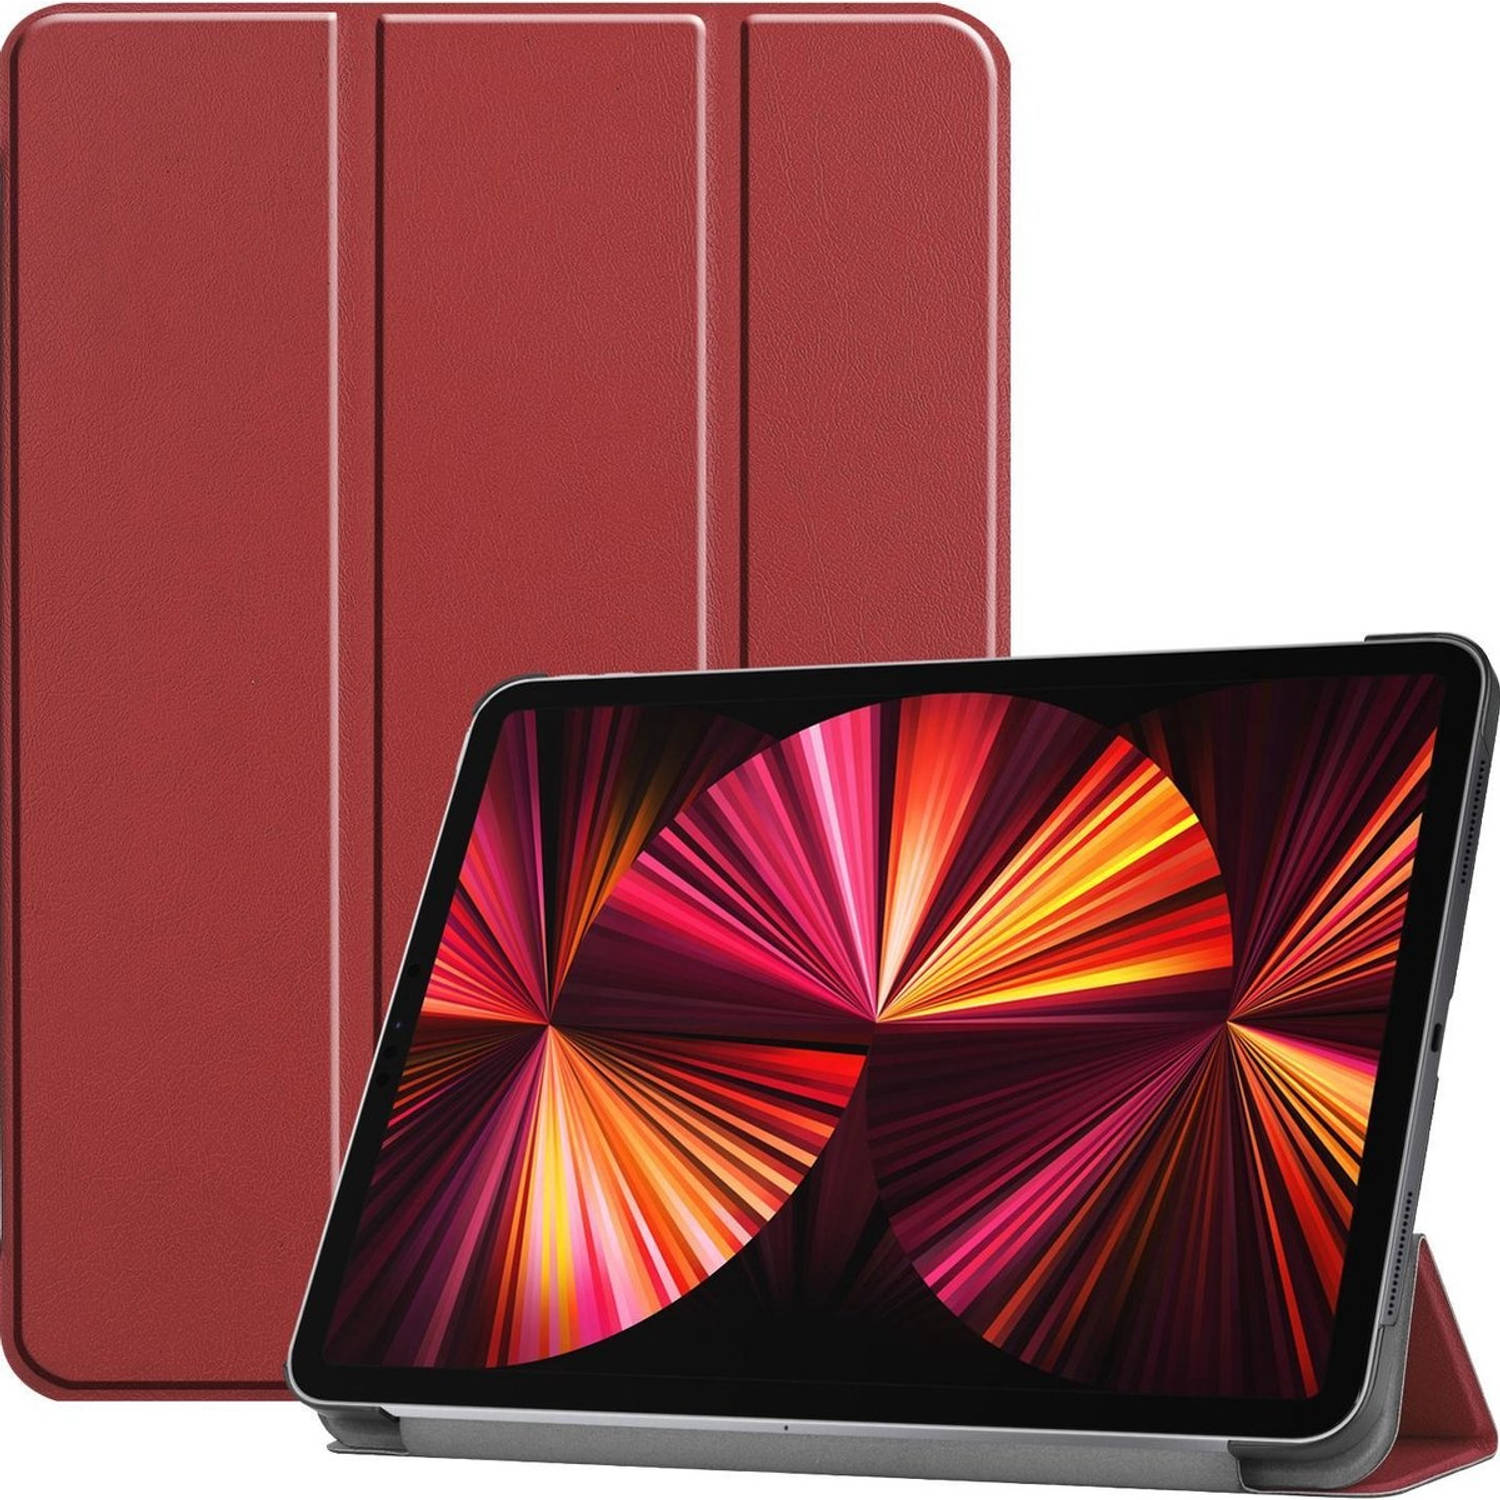 Basey Ipad Pro 2021 11 Inch Hoes Case Hoesje Donker Rood Hardcover Book Case Cover